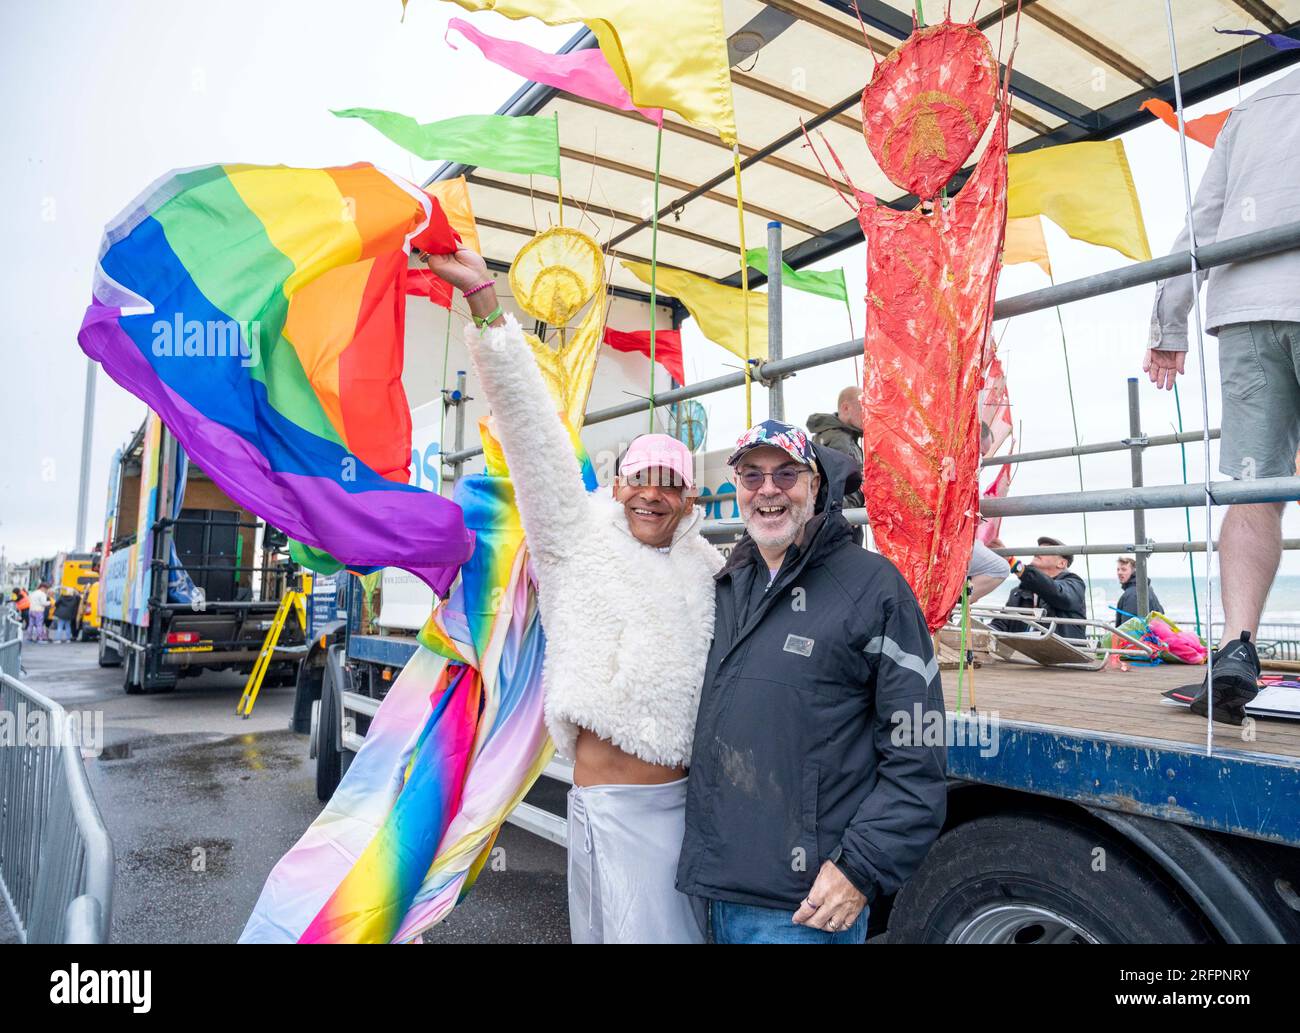 Brighton UK 5th August 2023 - Early arrivals brave the wind and rain at Brighton & Hove Pride Parade which  is  part of the largest  Pride festival events in the UK . Revellers brave the weather as Storm Antoni bathers part of the UK today    : Credit Simon Dack / Alamy Live News Stock Photo